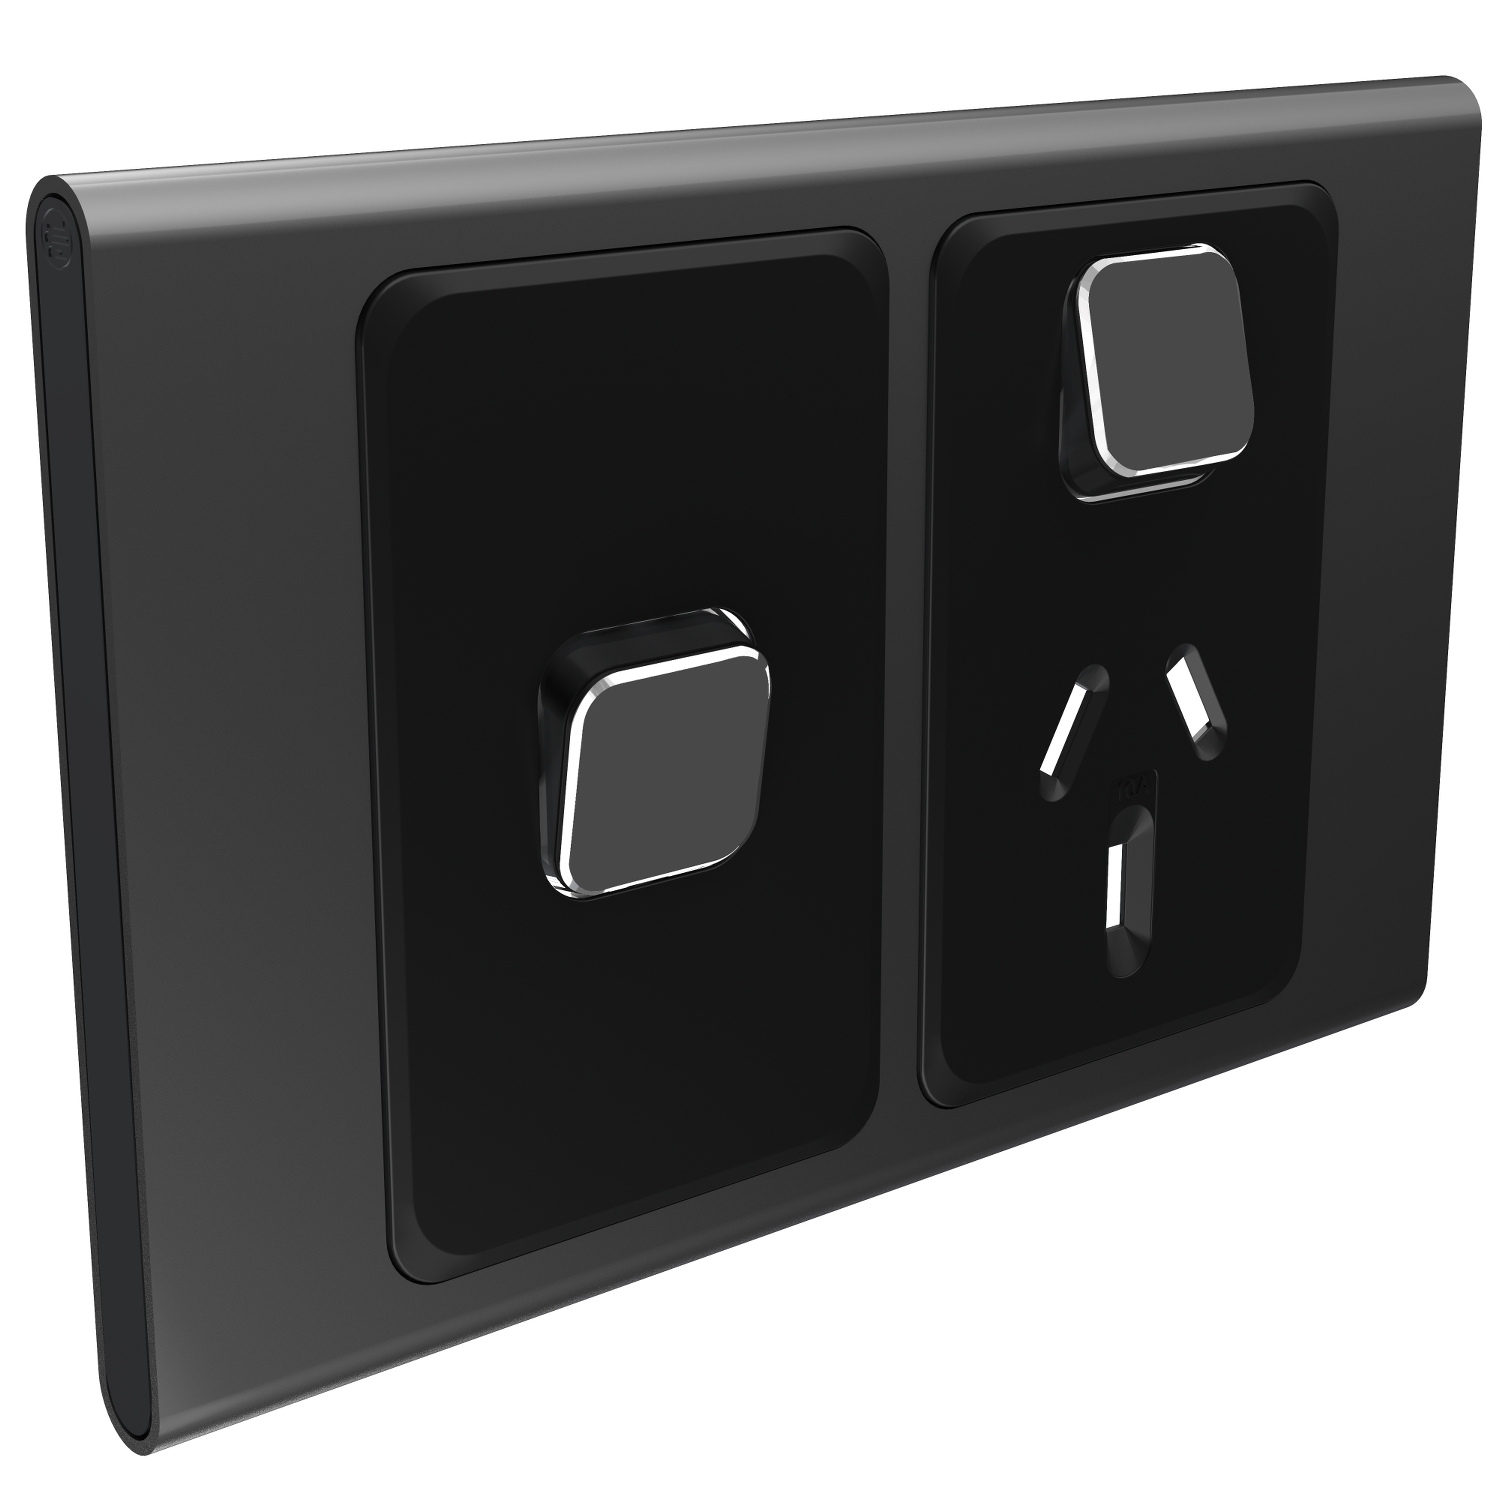 PDL Iconic Styl, cover frame, 2 switches & 1 socket, horizontal - Silver Shadow